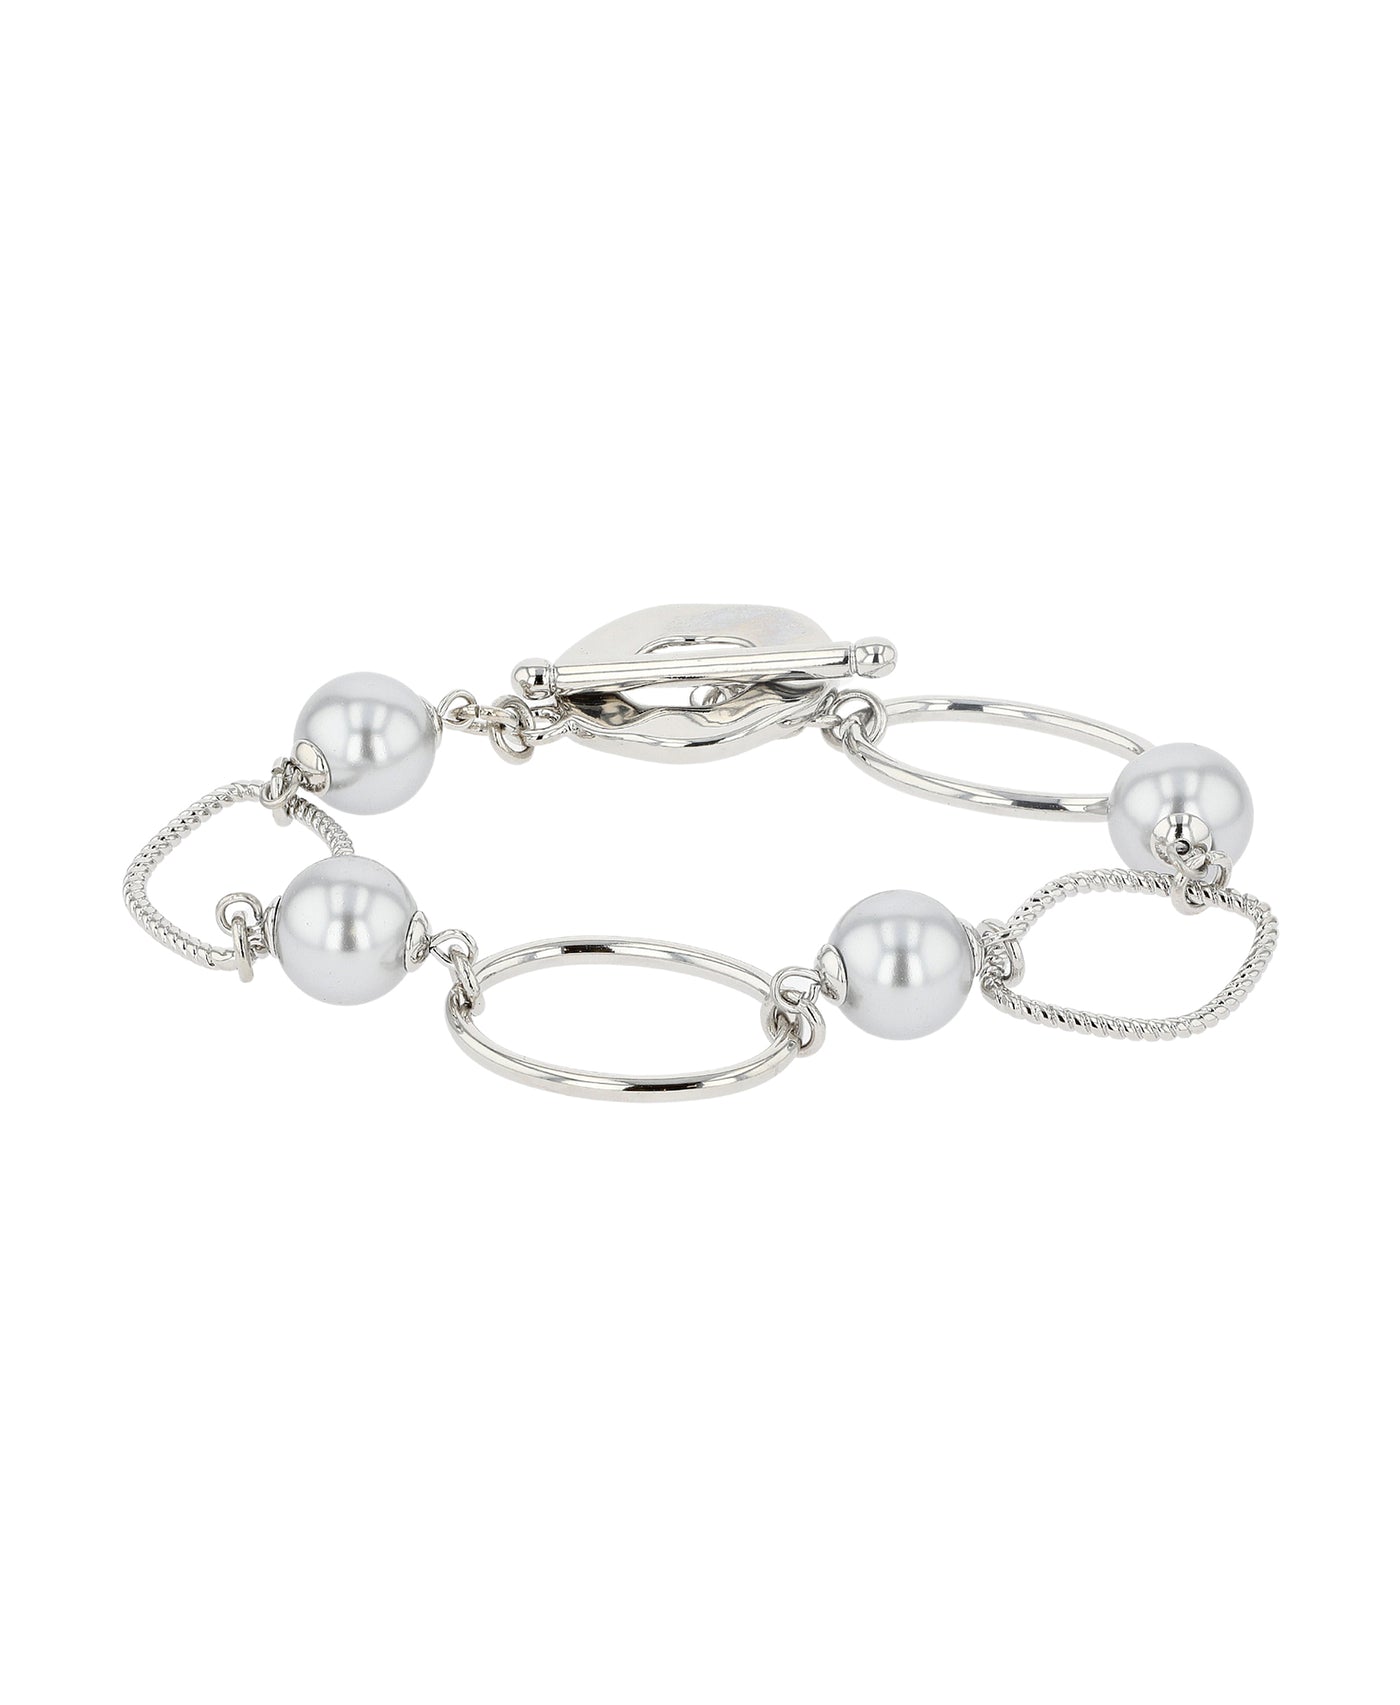 Toggle Bracelet w/ Faux Pearl Beads image 1